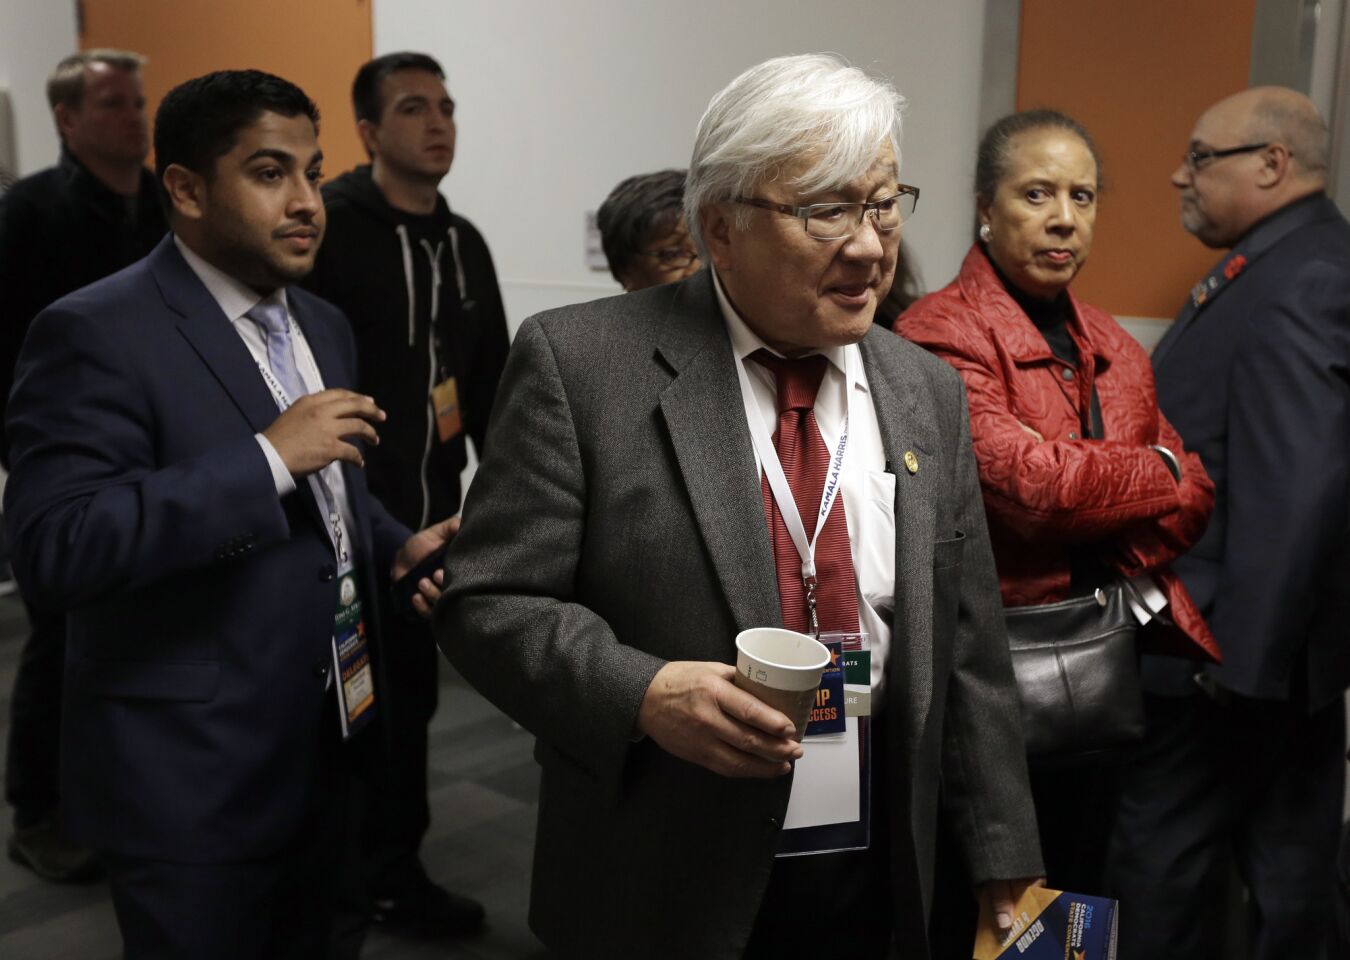 Rep. Michael M. Honda, D-San Jose, center, exits the main hall during a break in the California Democratic Party Convention on Saturday in San Jose.